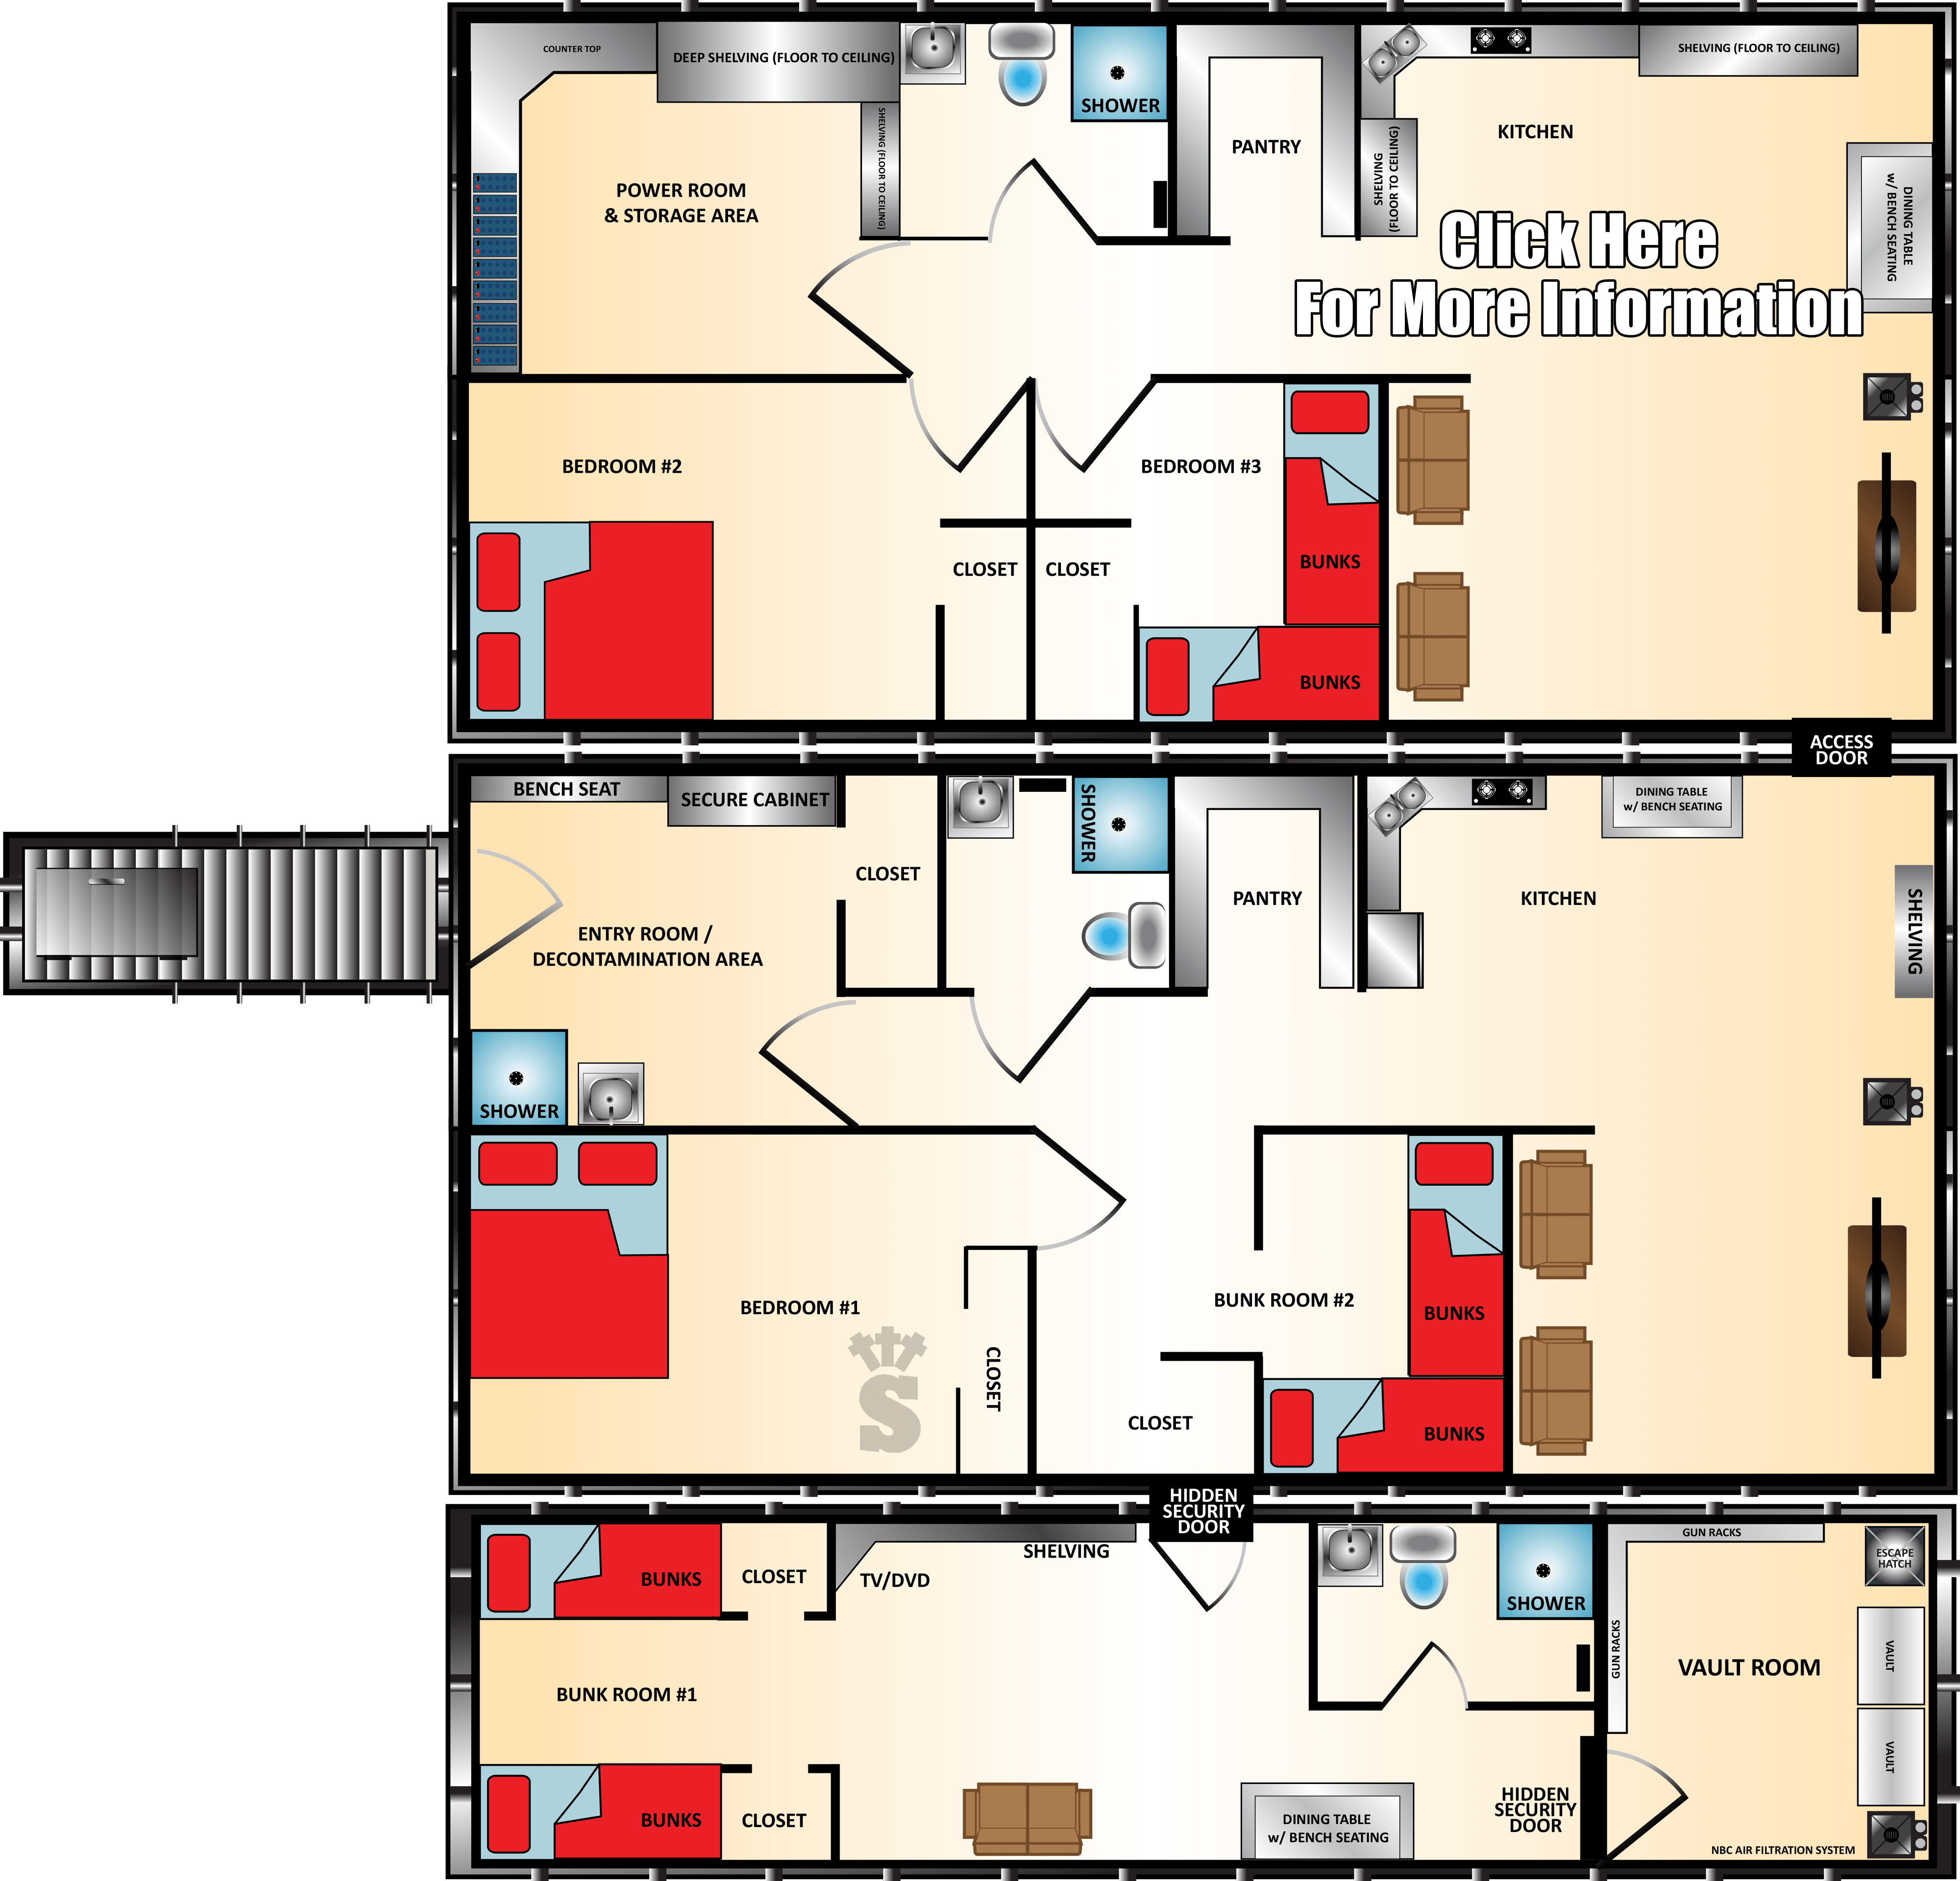 Bunker floor plans and pricing for models of various sizes